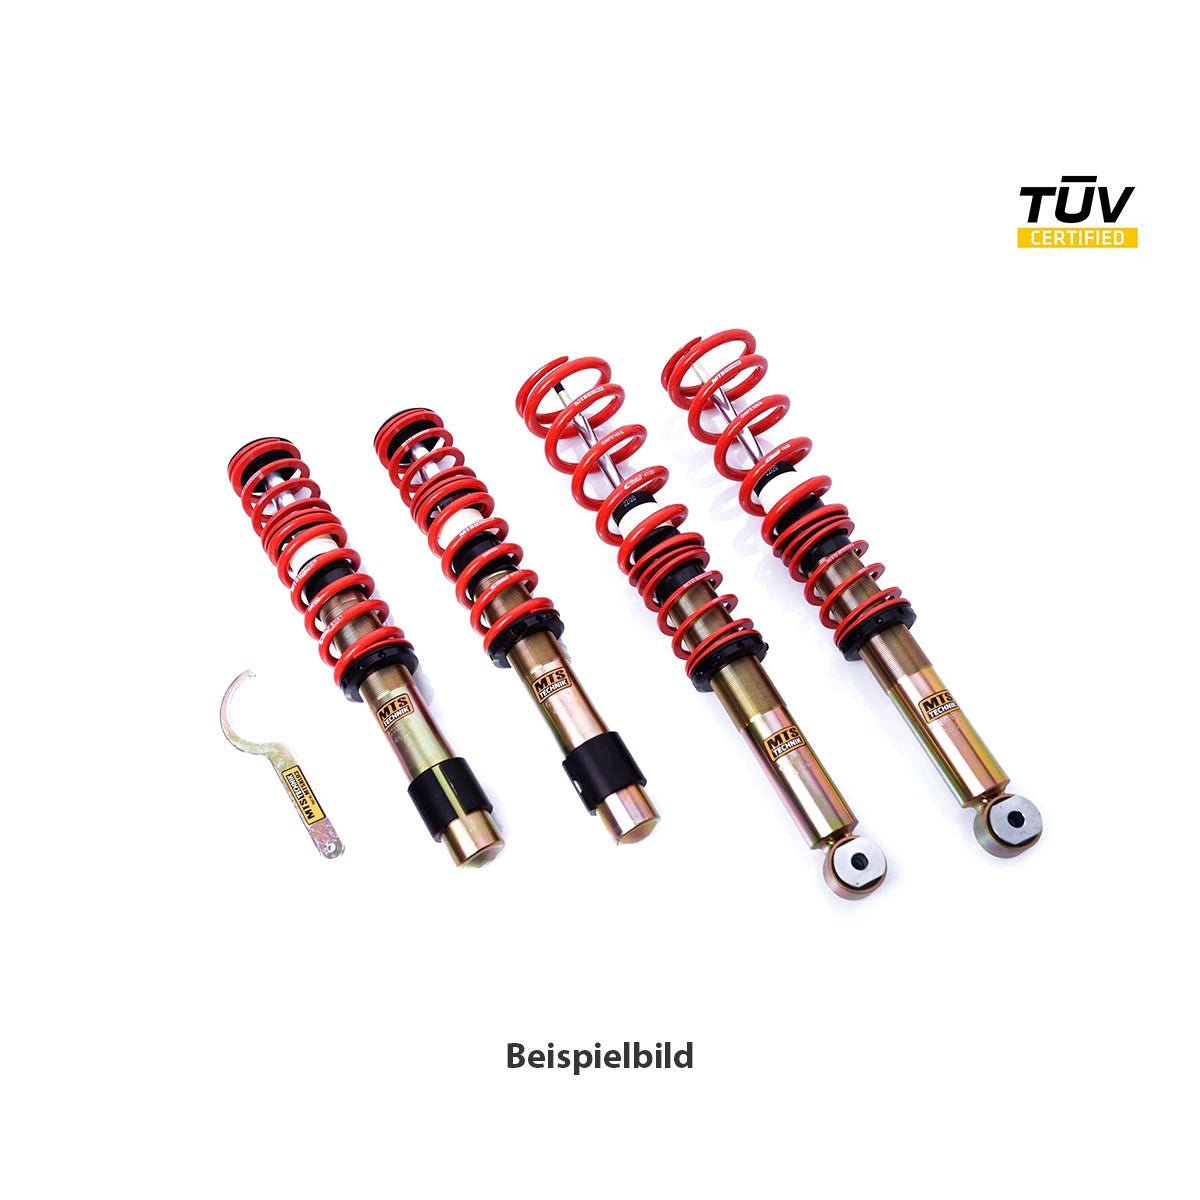 MTS TECHNIK Eibach coilover kit SPORT Skoda Roomster (with TÜV) - PARTS33 GmbH